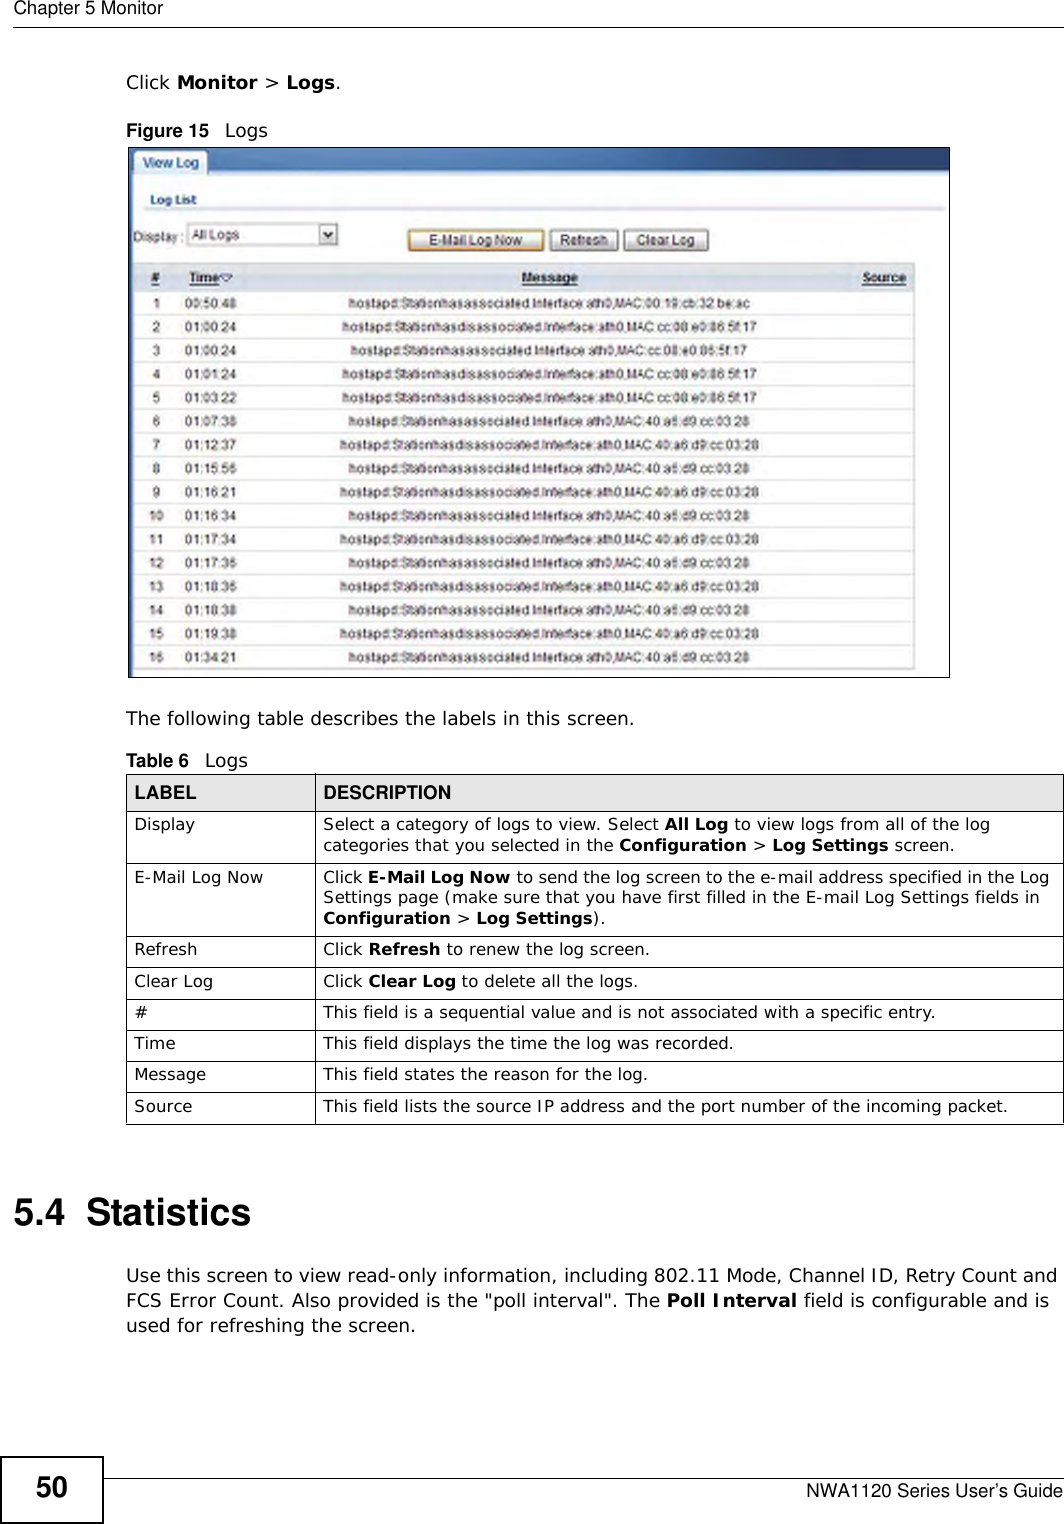 Chapter 5 MonitorNWA1120 Series User’s Guide50Click Monitor &gt; Logs.Figure 15   Logs The following table describes the labels in this screen. 5.4  StatisticsUse this screen to view read-only information, including 802.11 Mode, Channel ID, Retry Count and FCS Error Count. Also provided is the &quot;poll interval&quot;. The Poll Interval field is configurable and is used for refreshing the screen.Table 6   LogsLABEL DESCRIPTIONDisplay  Select a category of logs to view. Select All Log to view logs from all of the log categories that you selected in the Configuration &gt; Log Settings screen.E-Mail Log Now Click E-Mail Log Now to send the log screen to the e-mail address specified in the Log Settings page (make sure that you have first filled in the E-mail Log Settings fields in Configuration &gt; Log Settings).Refresh Click Refresh to renew the log screen. Clear Log Click Clear Log to delete all the logs. #This field is a sequential value and is not associated with a specific entry.Time  This field displays the time the log was recorded. Message This field states the reason for the log.Source This field lists the source IP address and the port number of the incoming packet.